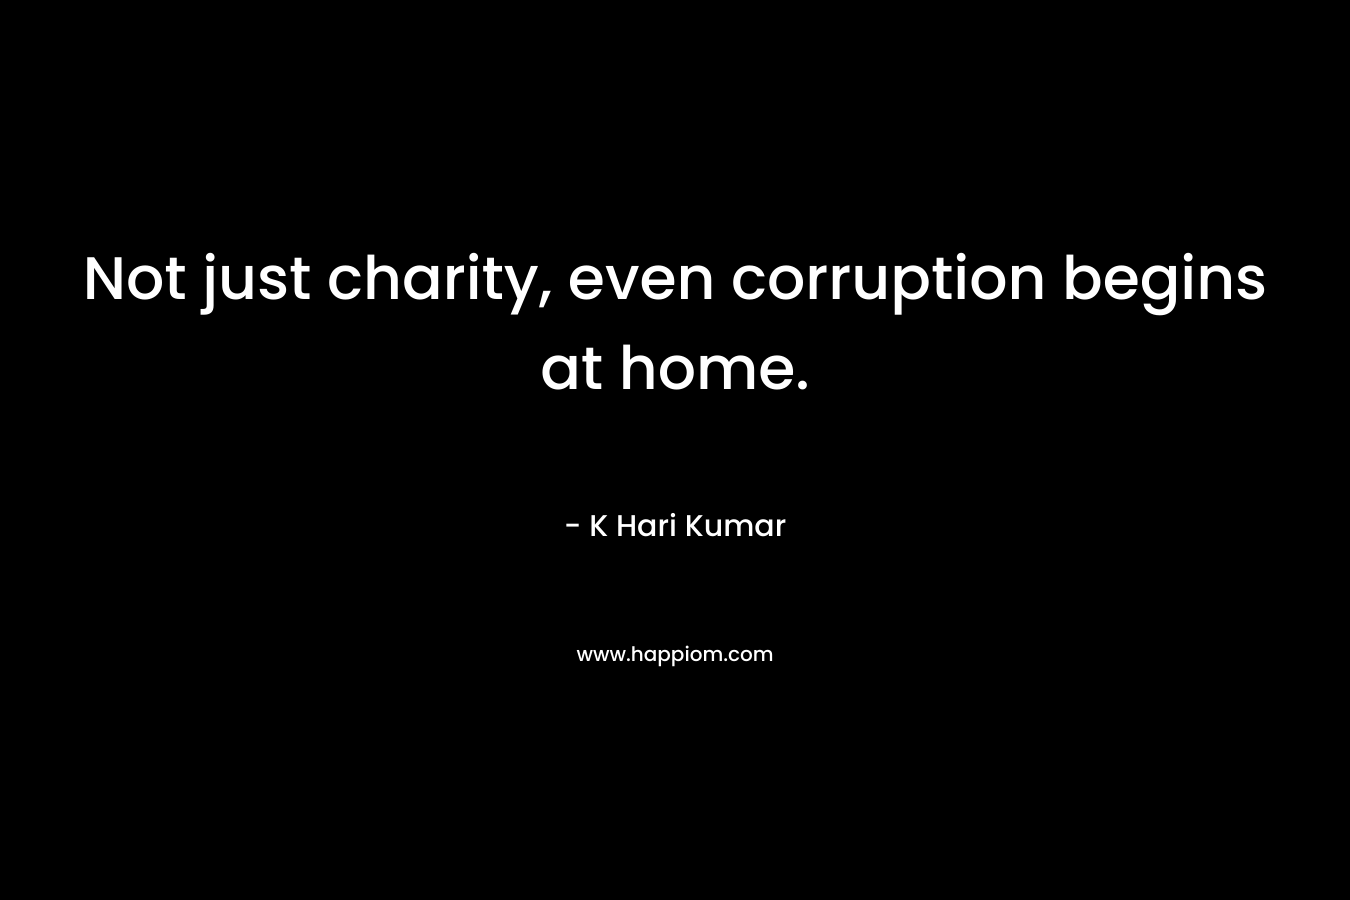 Not just charity, even corruption begins at home.